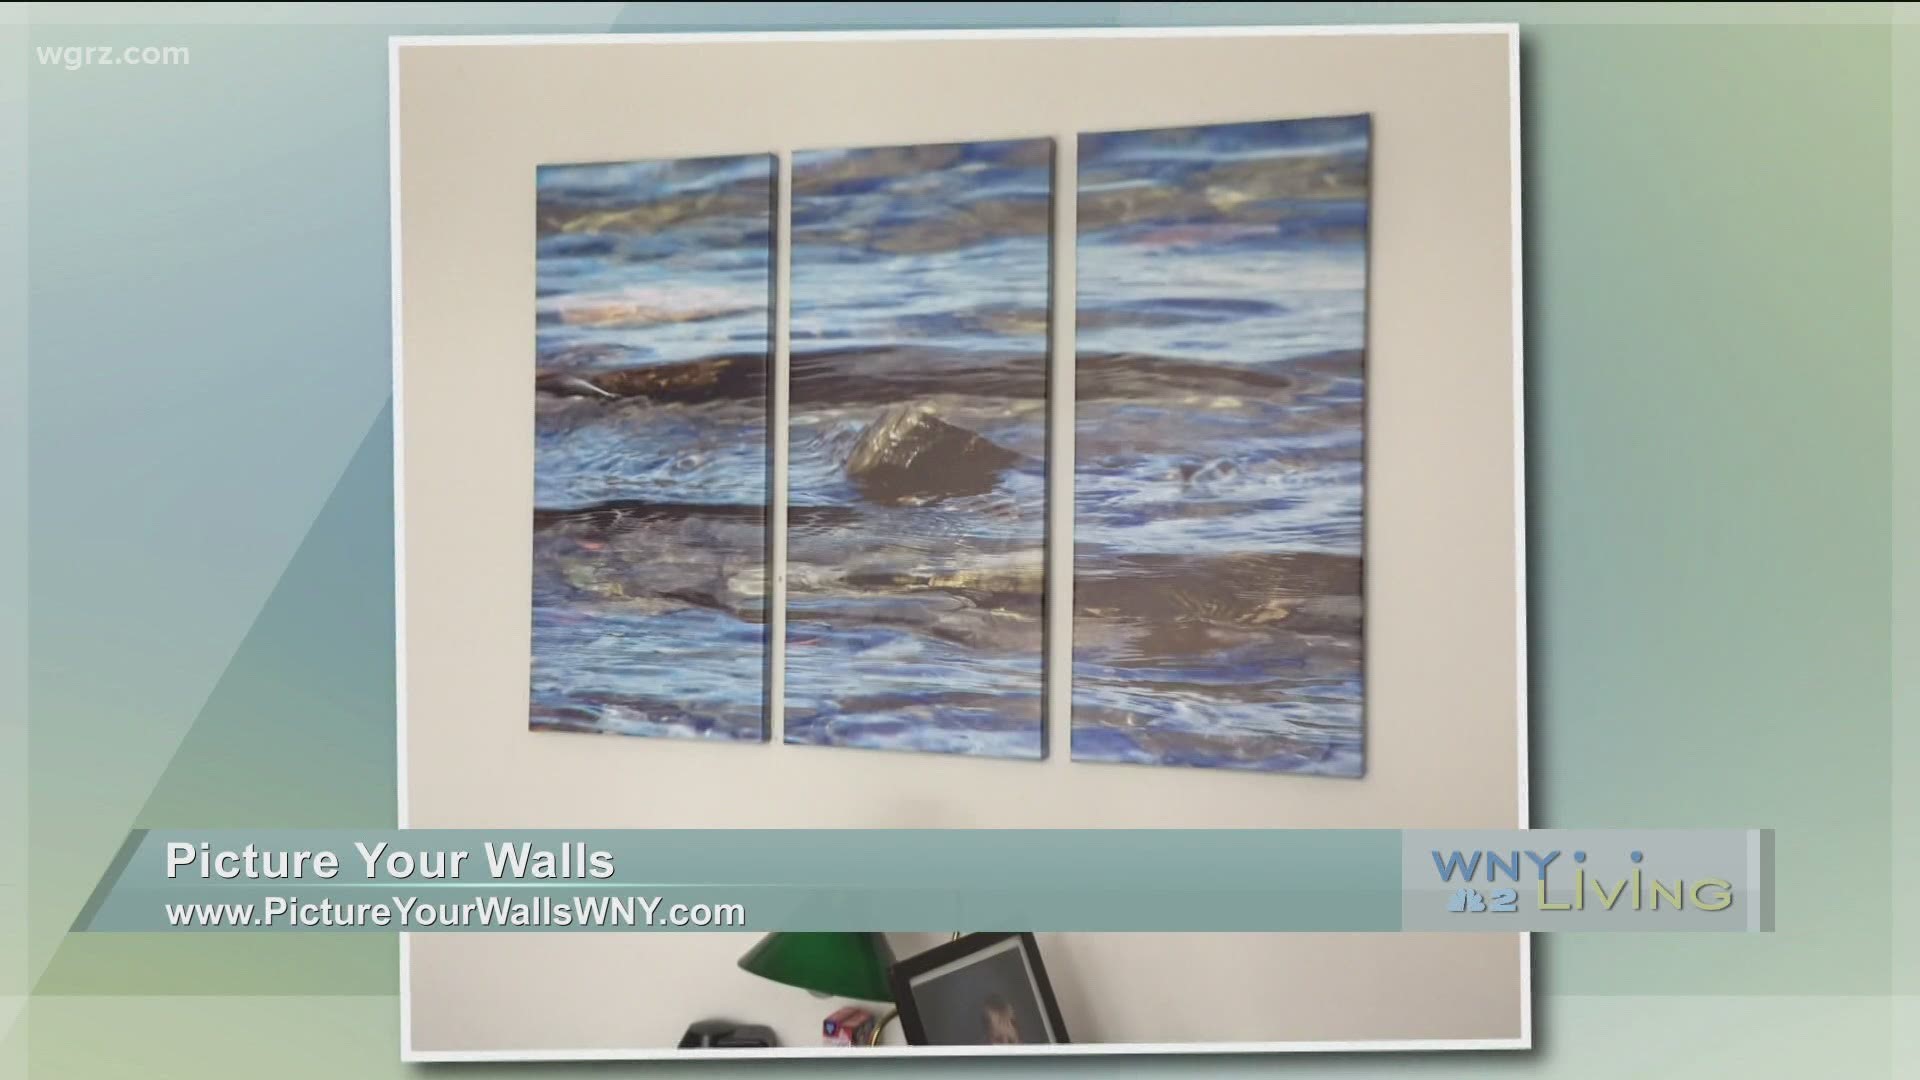 WNY Living - September 19 - Picture Your Walls (THIS VIDEO IS SPONSORED BY PICTURE YOUR WALLS)